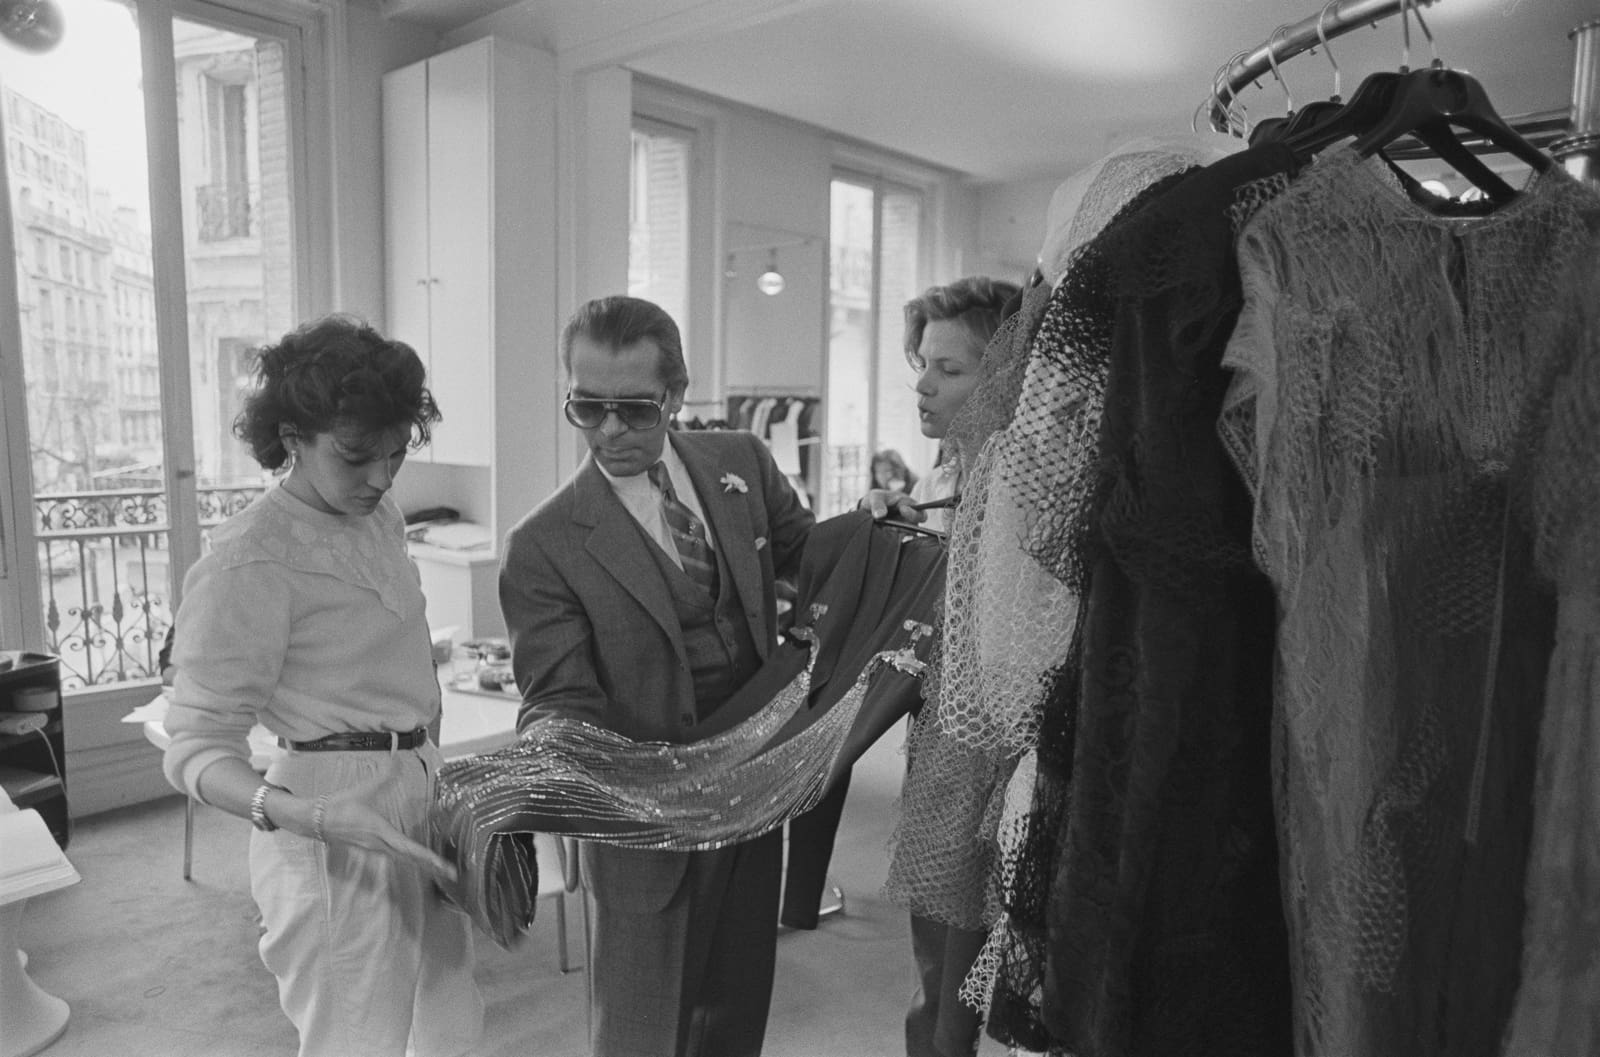 1964 – Lagerfeld begins collaborating with Chloé